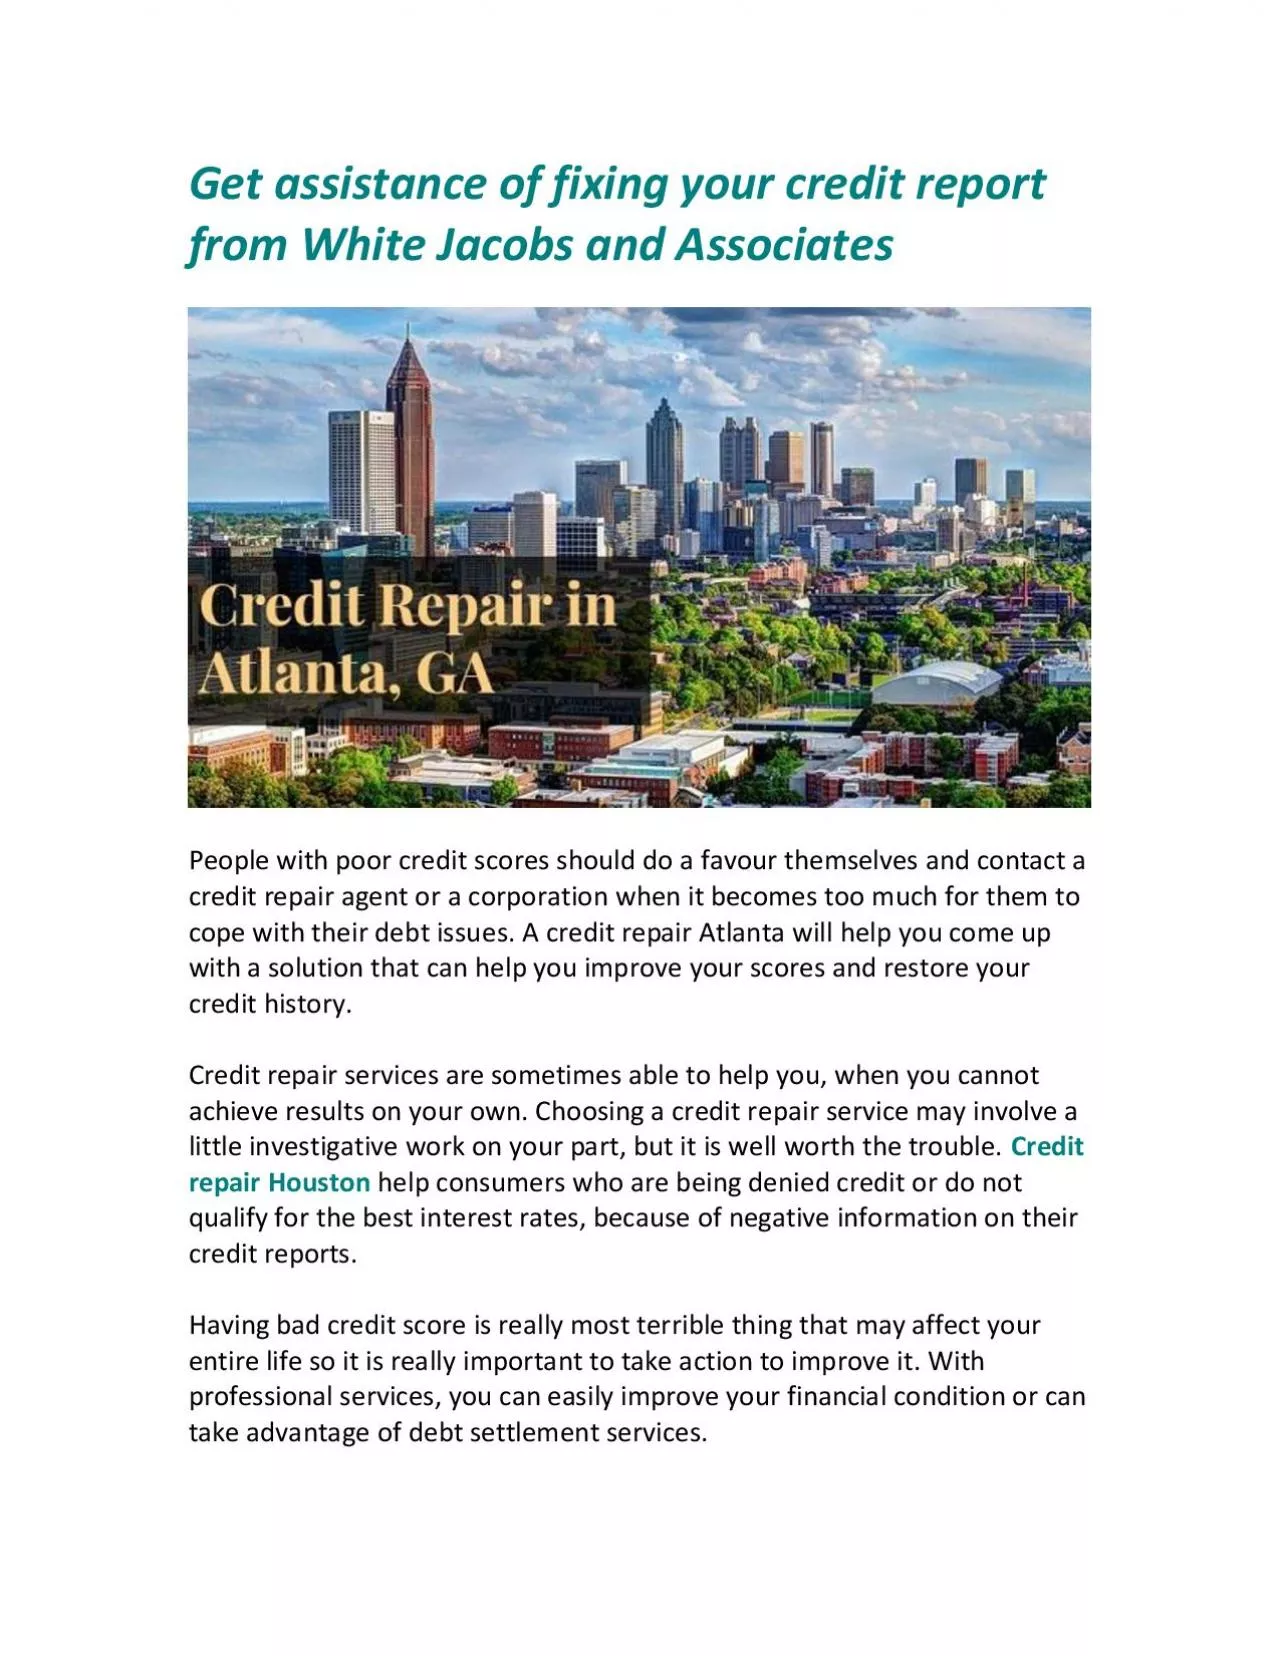 Get assistance of fixing your credit report from White Jacobs and Associates